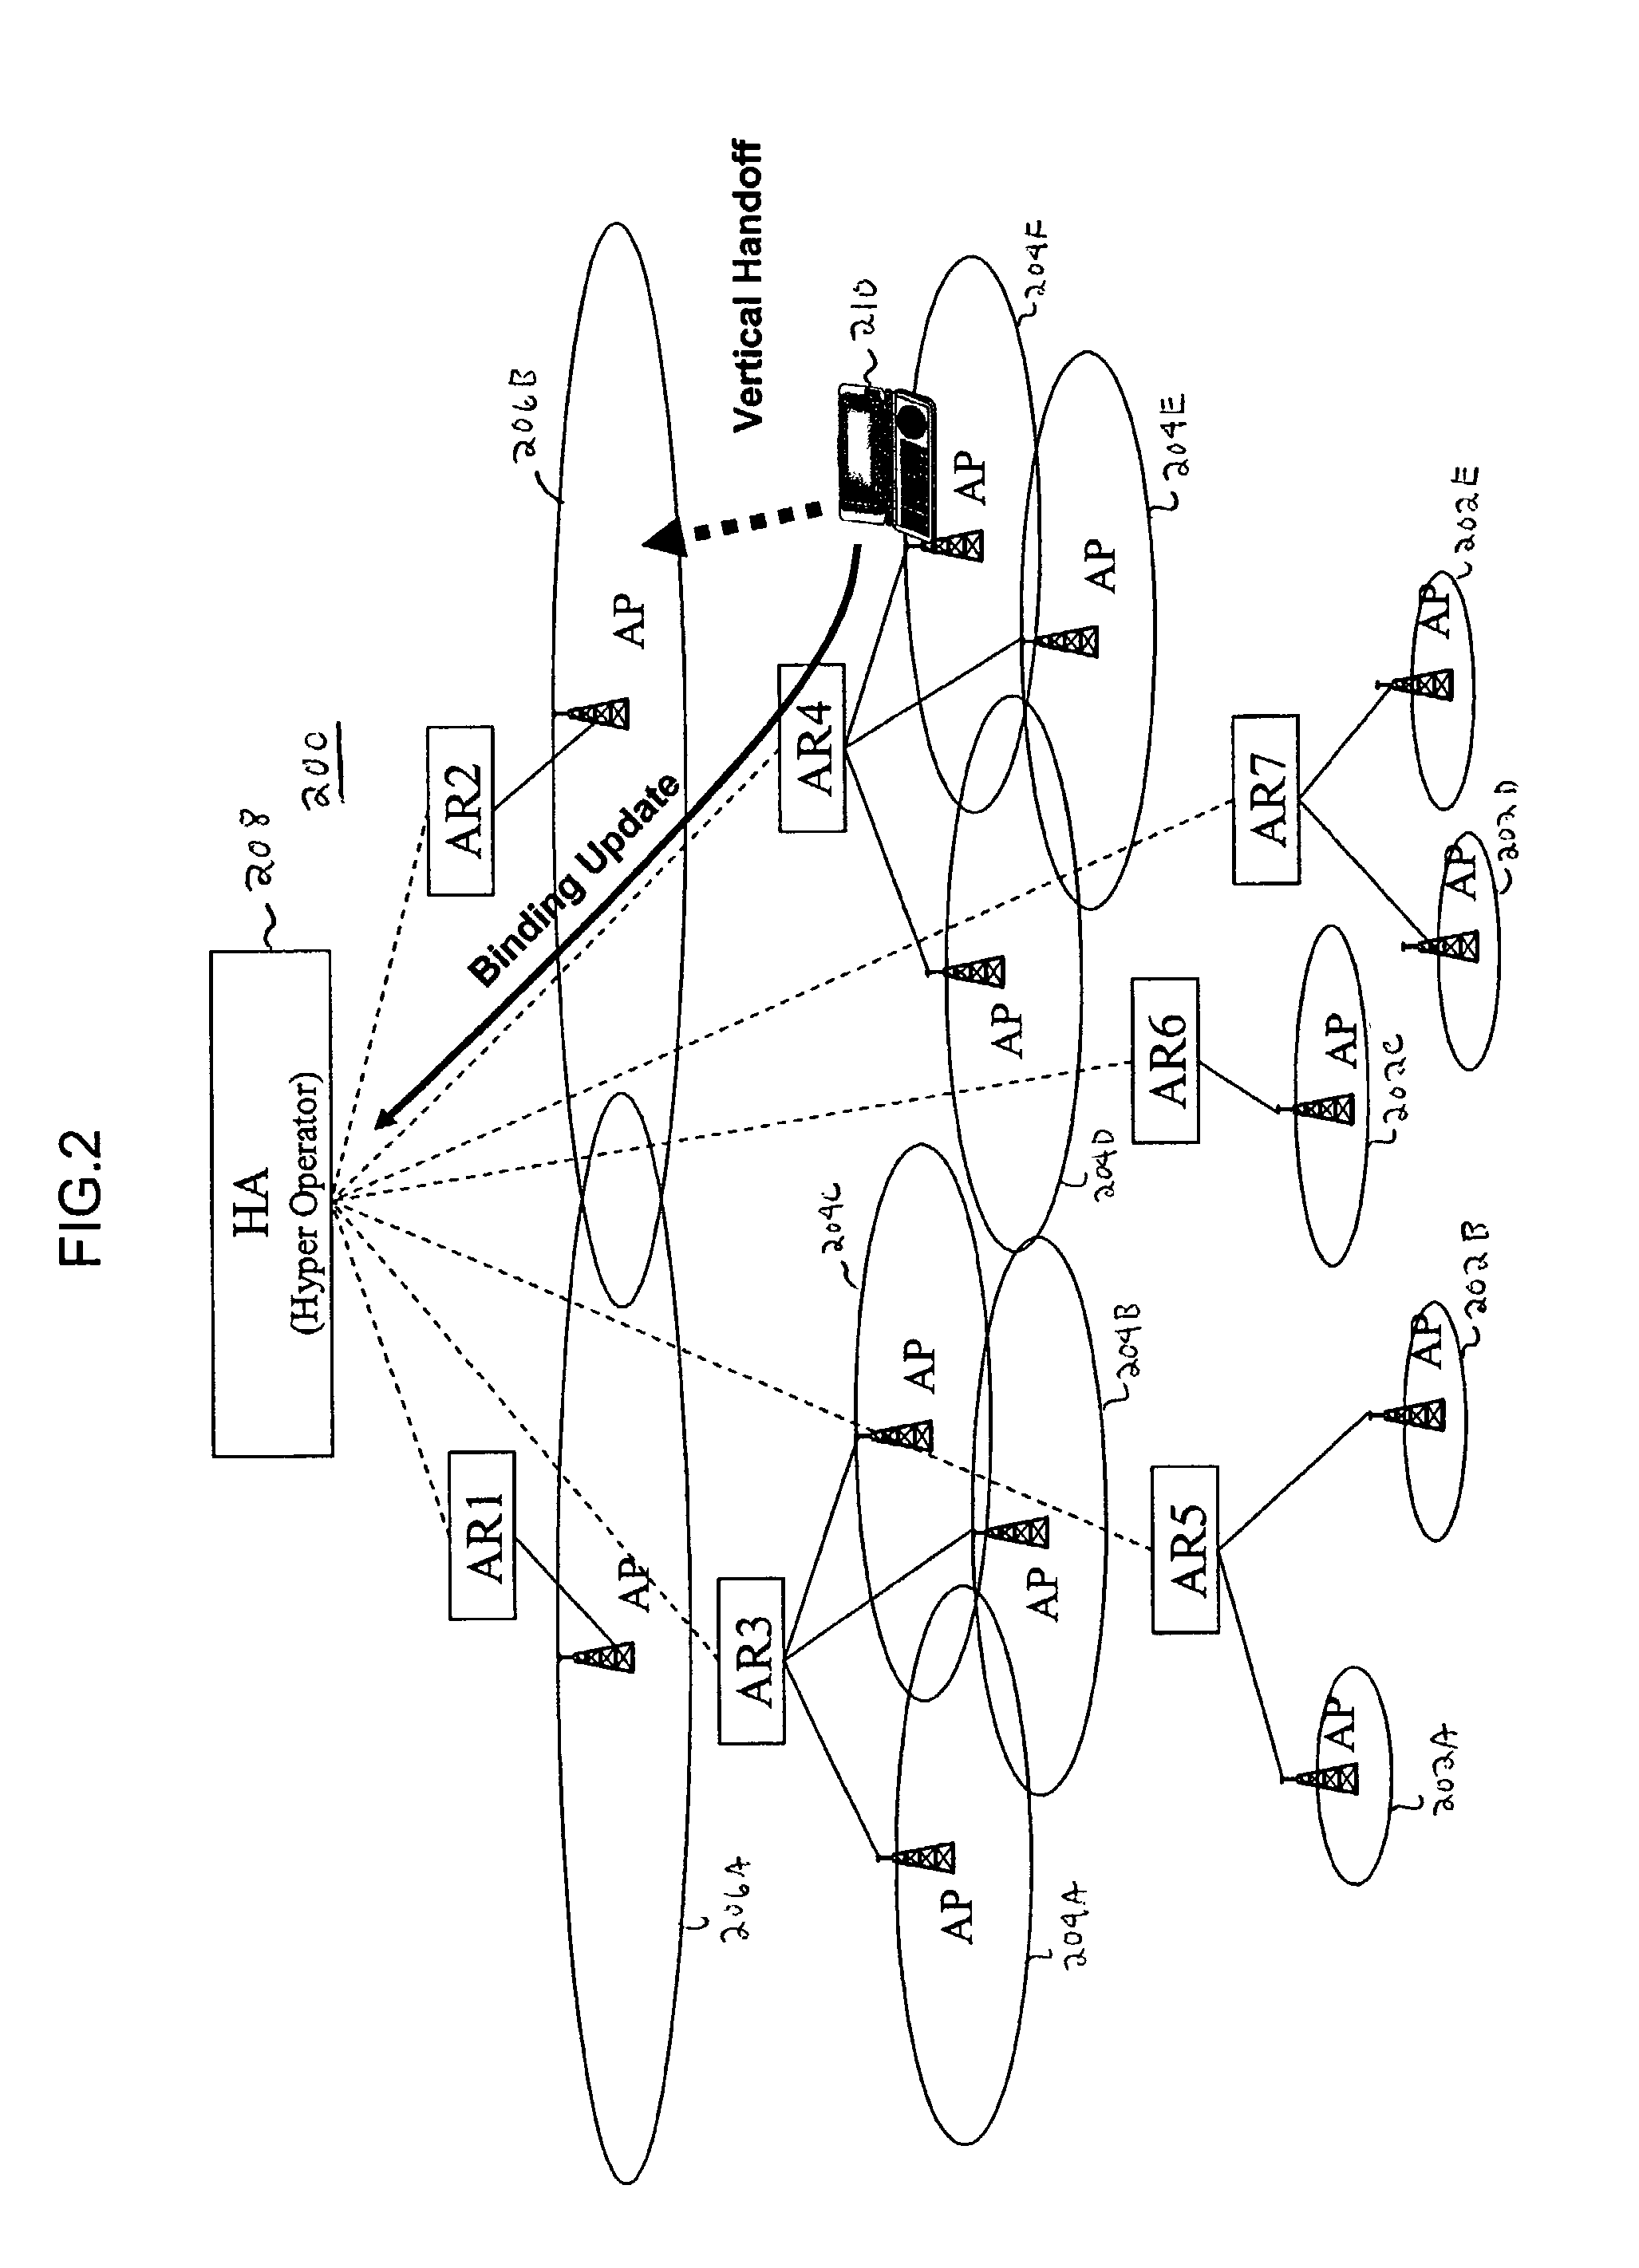 Method and associated apparatus for increment accuracy of geographical foreign agent topology relation in heterogeneous access networks